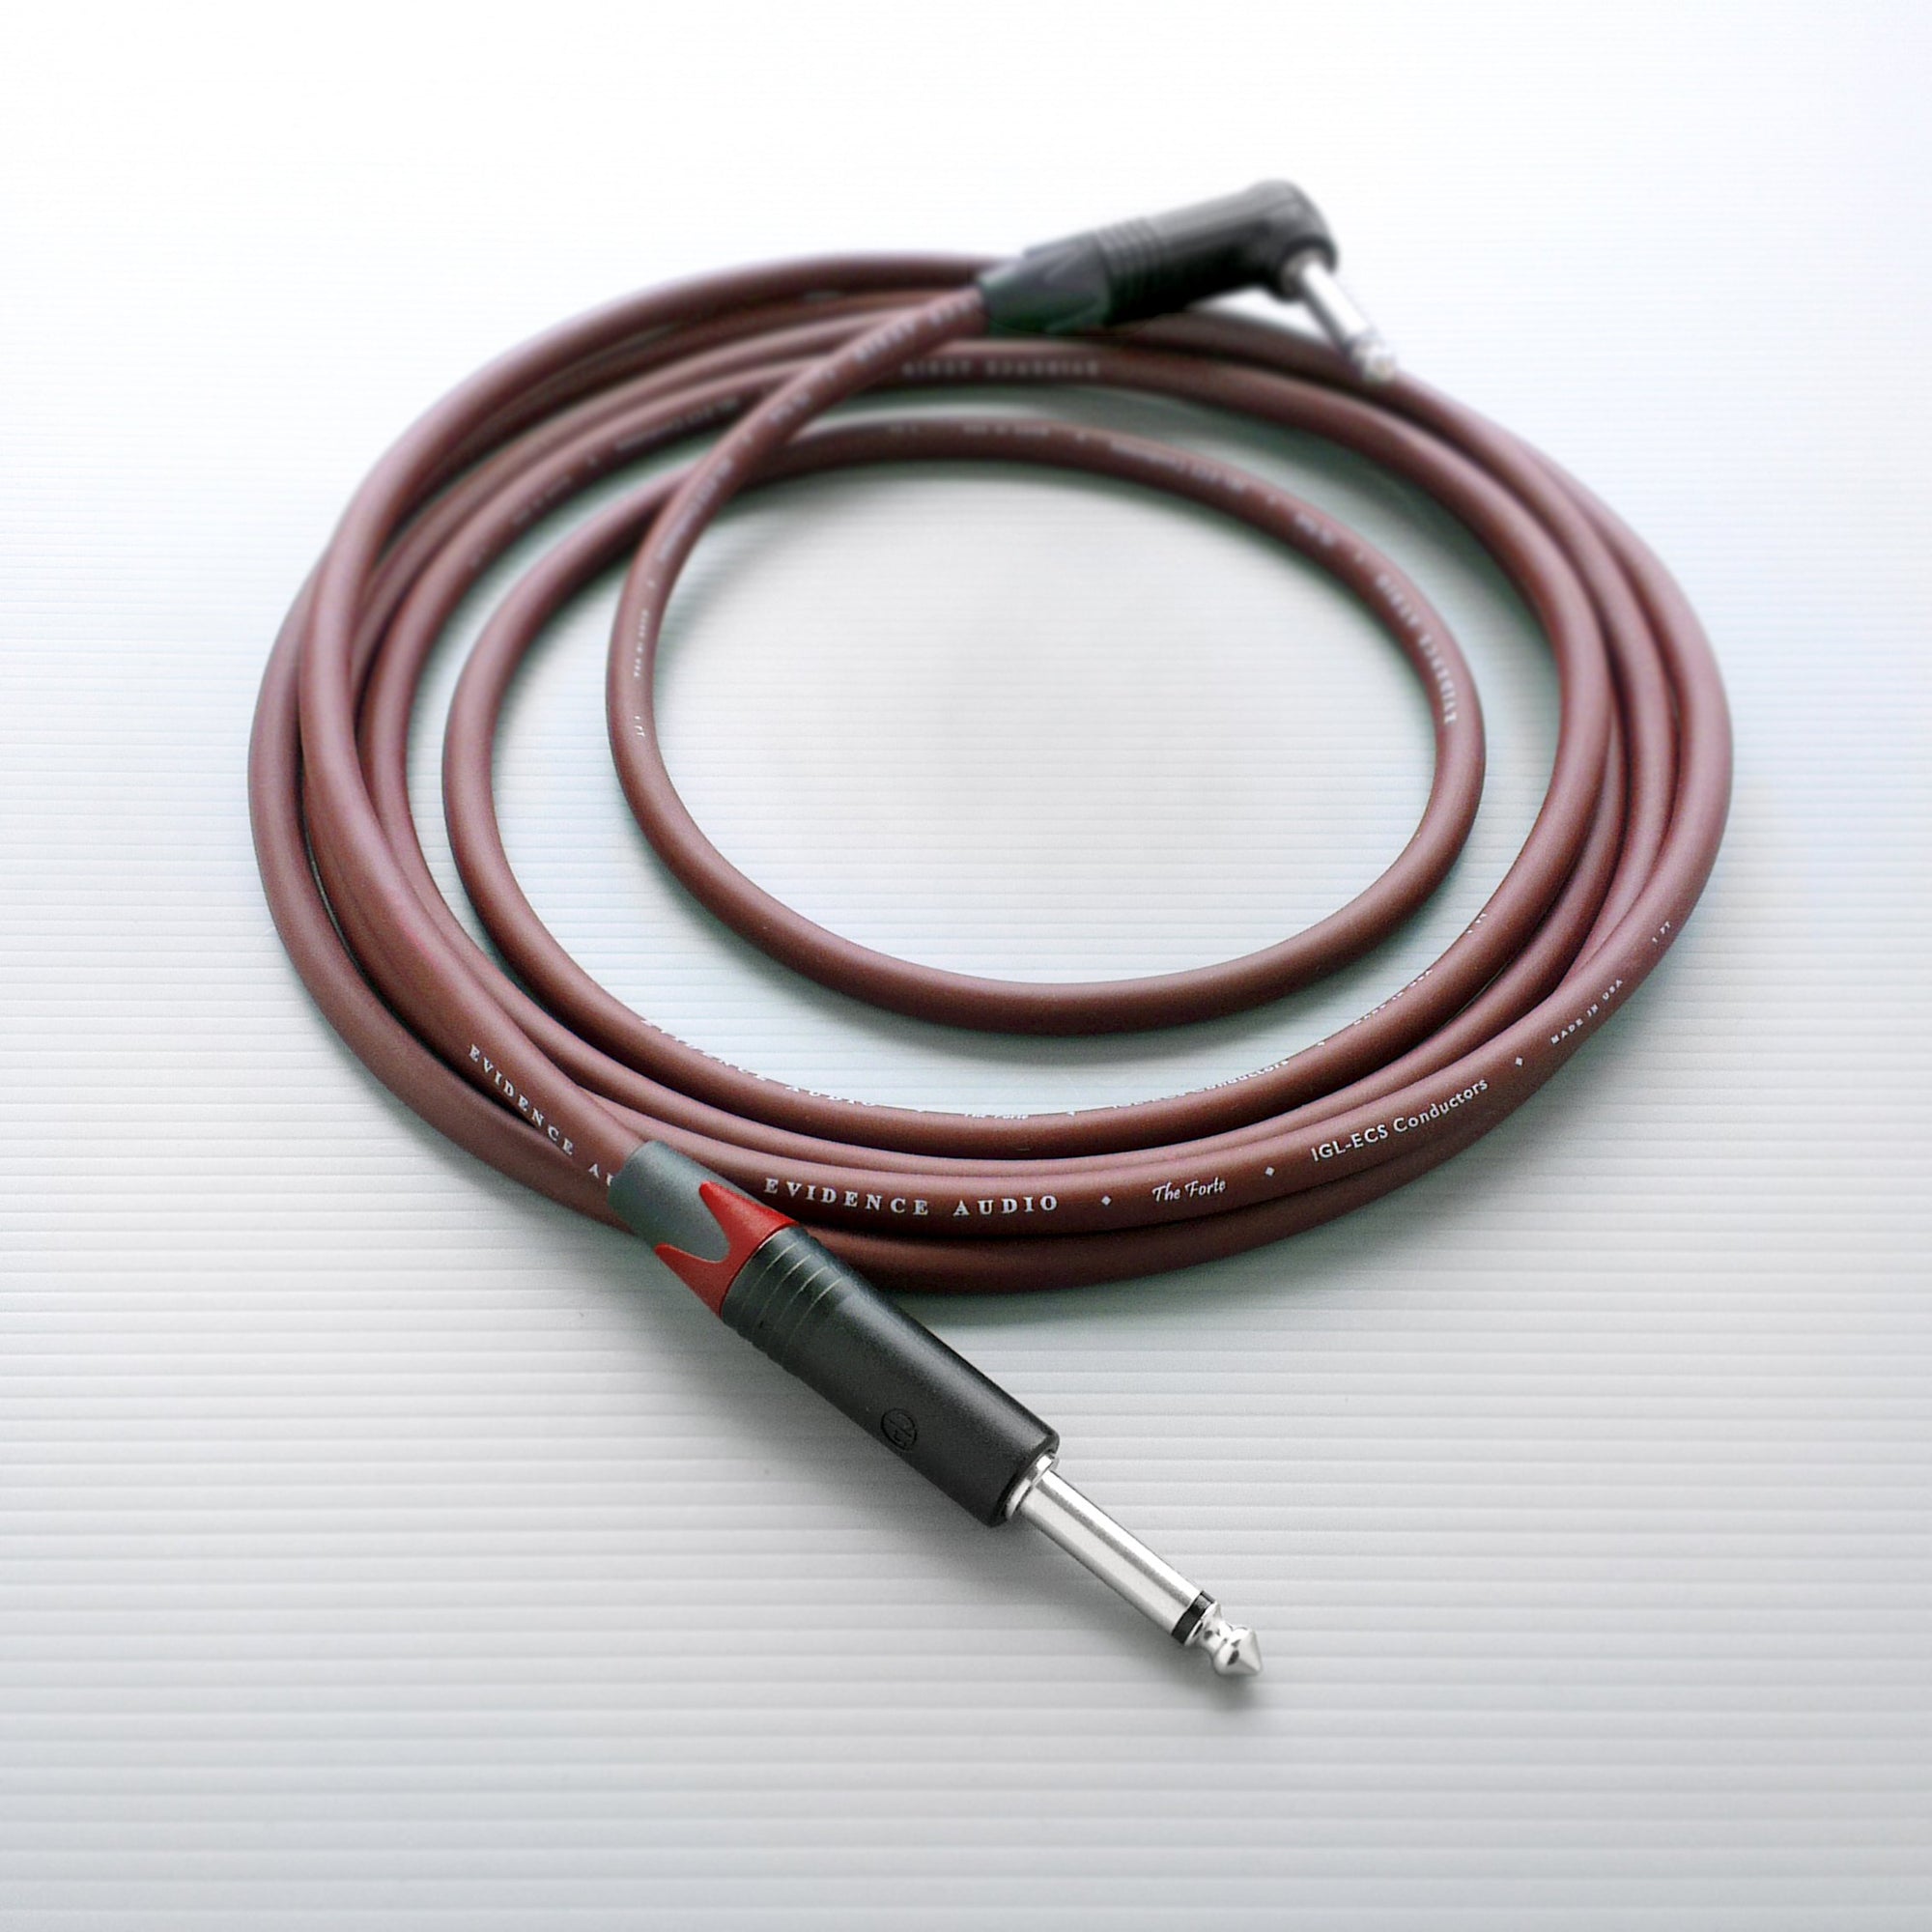 Evidence Audio Forte Guitar Cable - 20ft: Straight to Right Angle